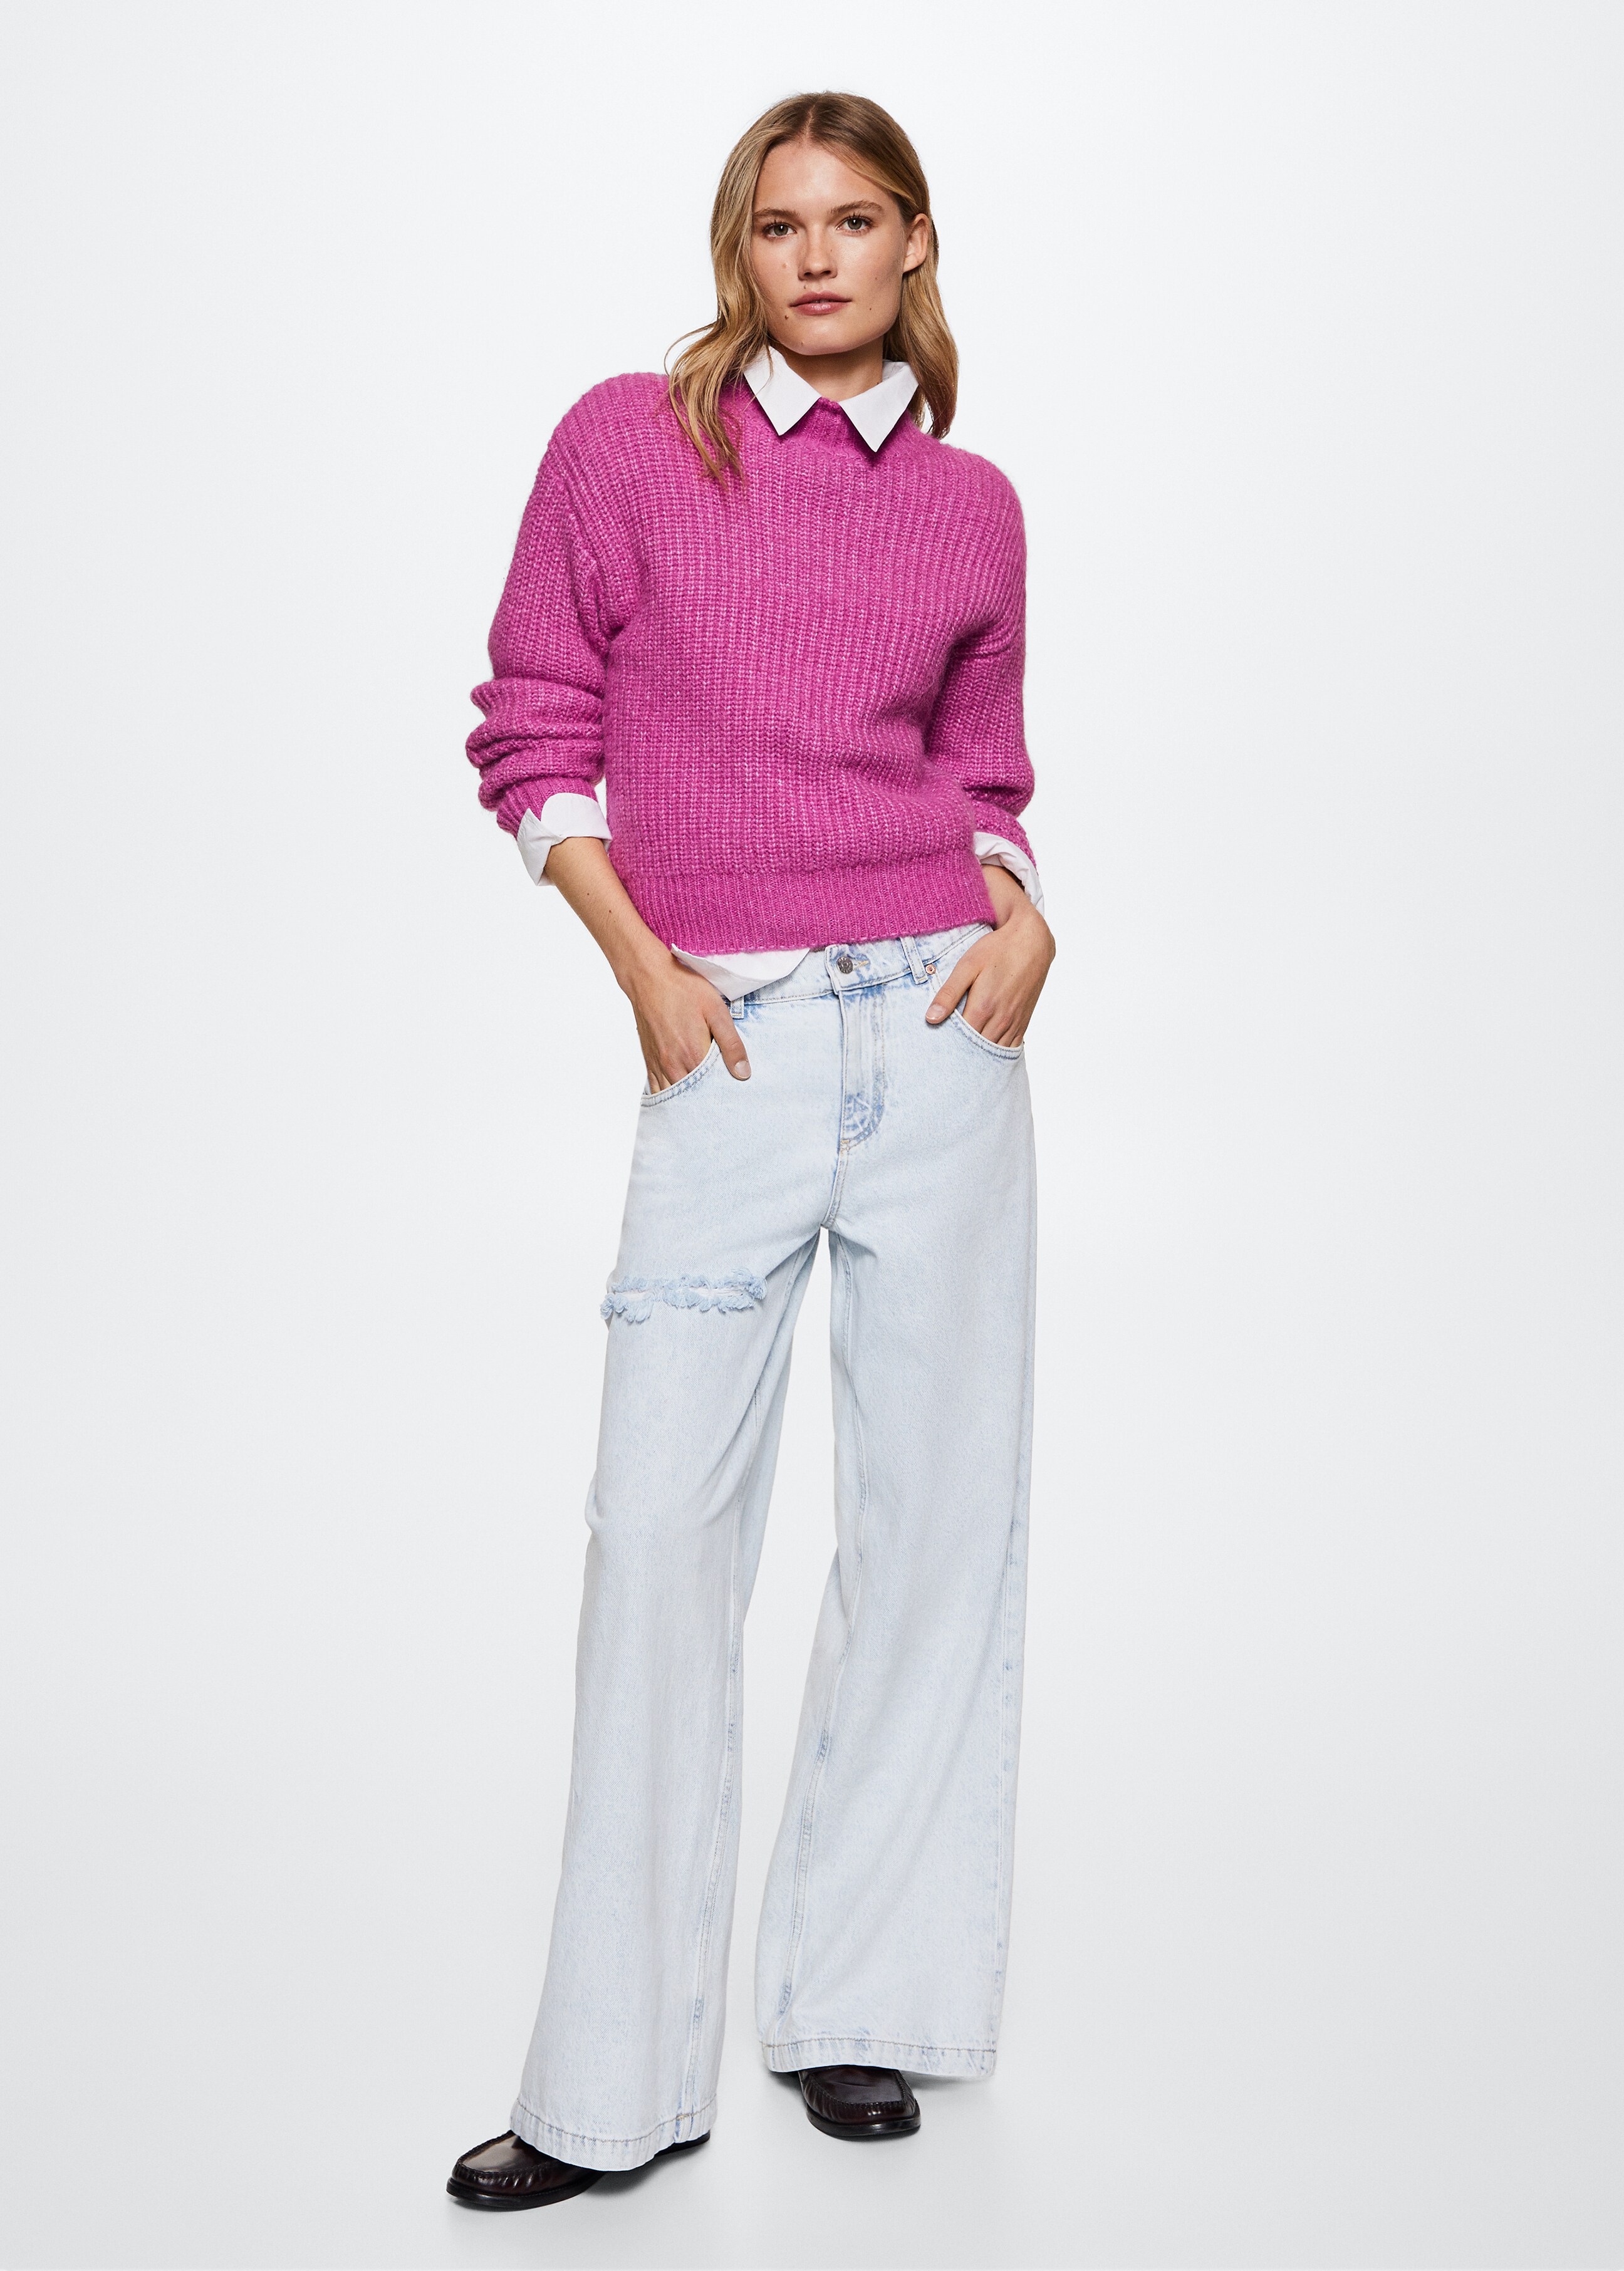 High collar ribbed knit  sweater - General plane